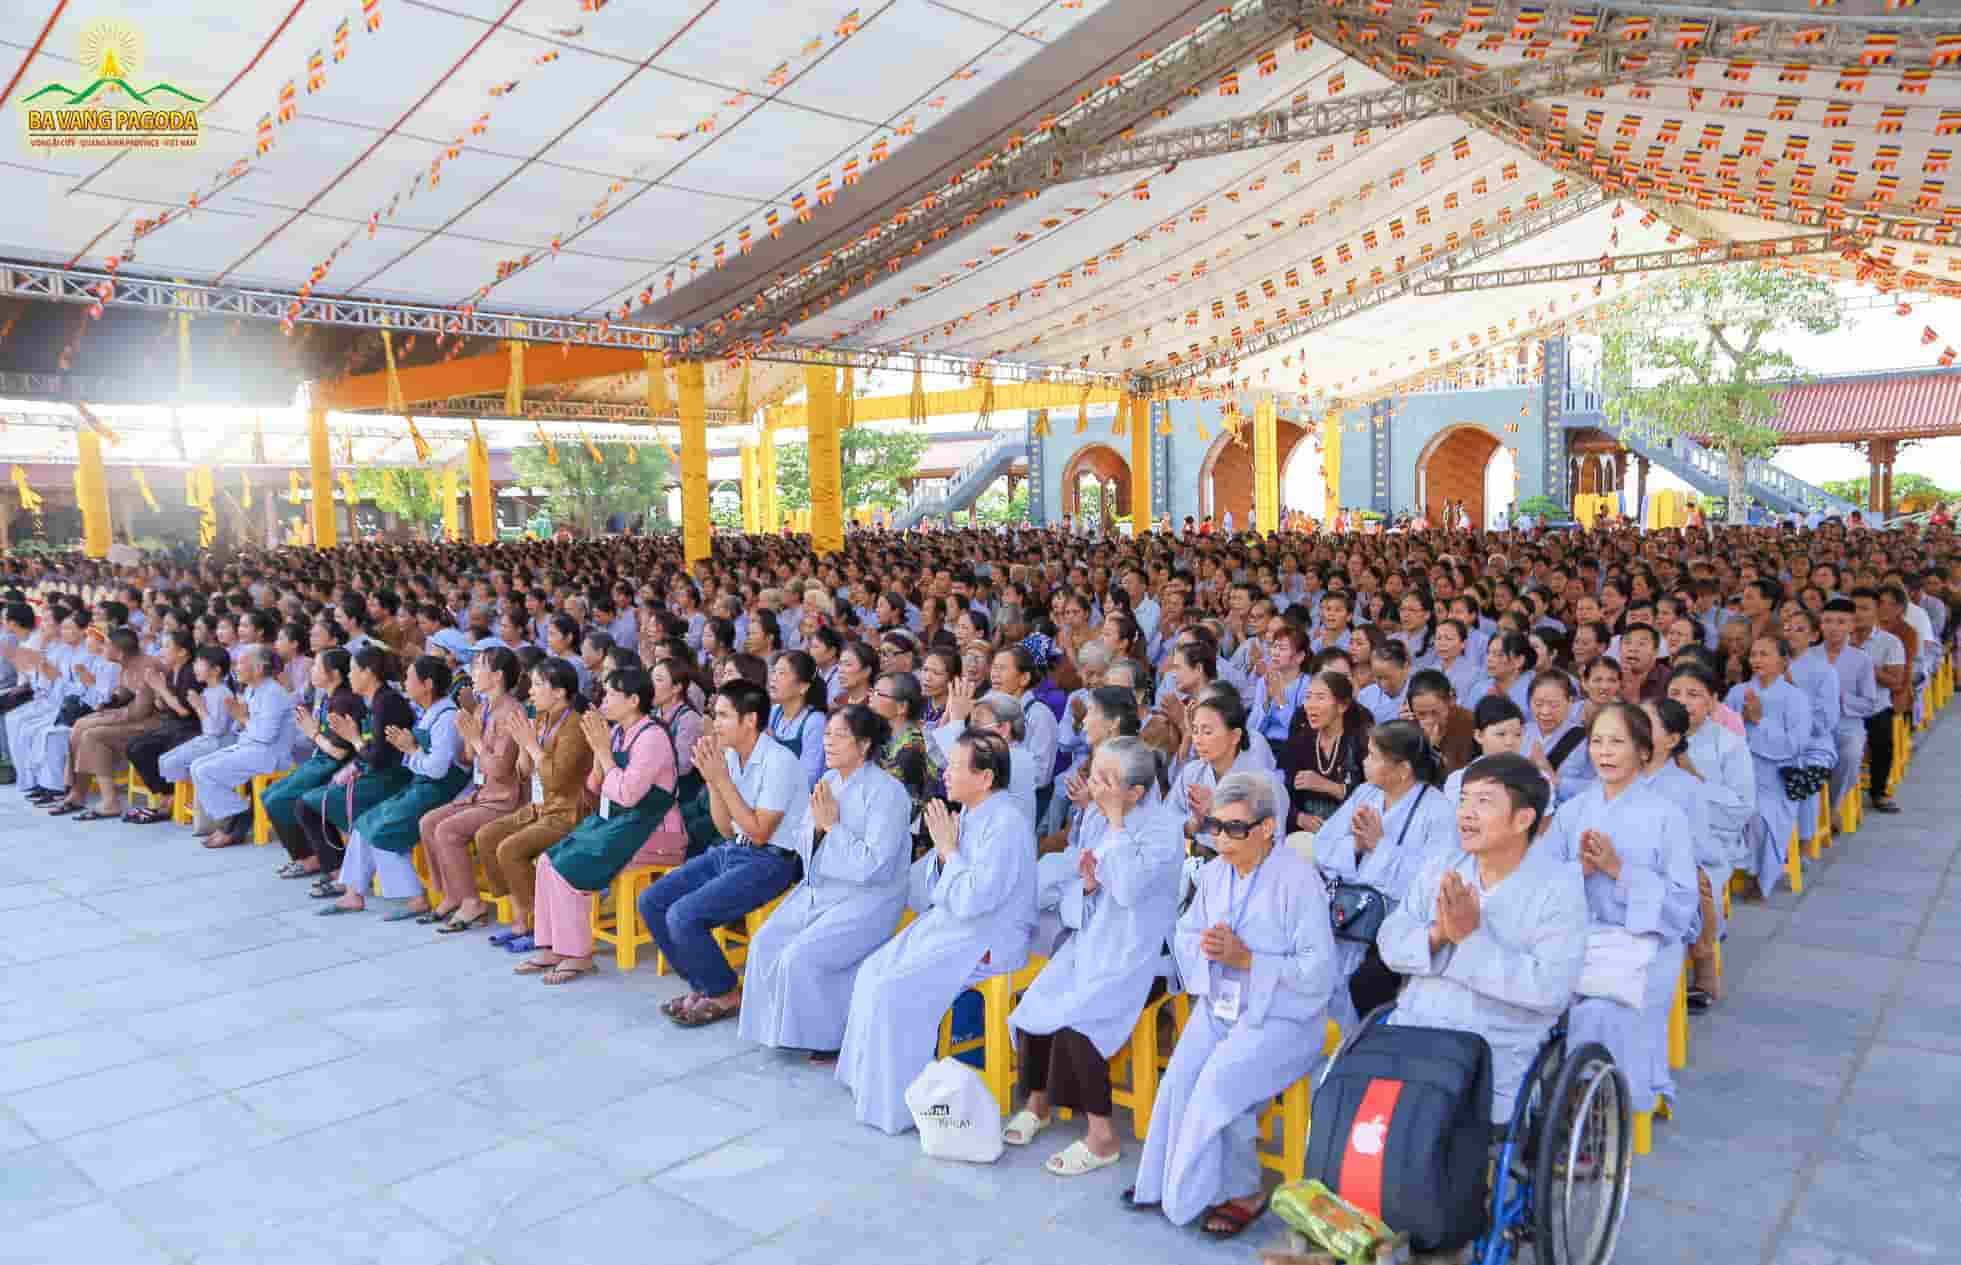 Thousands of Buddhists attending to the Commemoration ceremony at Ba Vang Pagoda